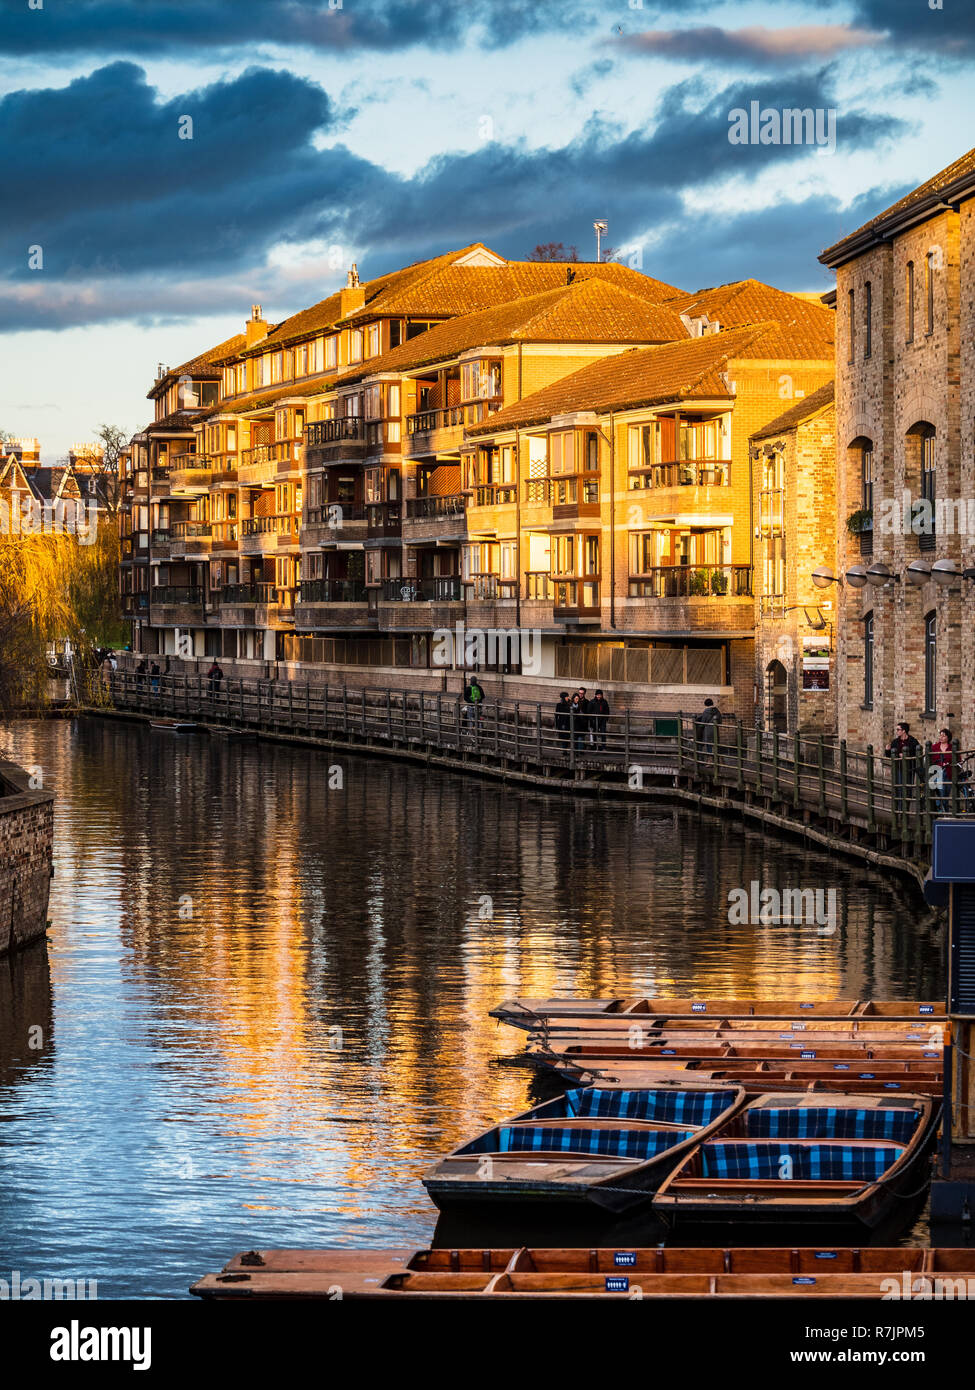 Cambridge Quayside - buildings lit by evening sunshine on the bank of the River Cam in central Cambridge UK Stock Photo